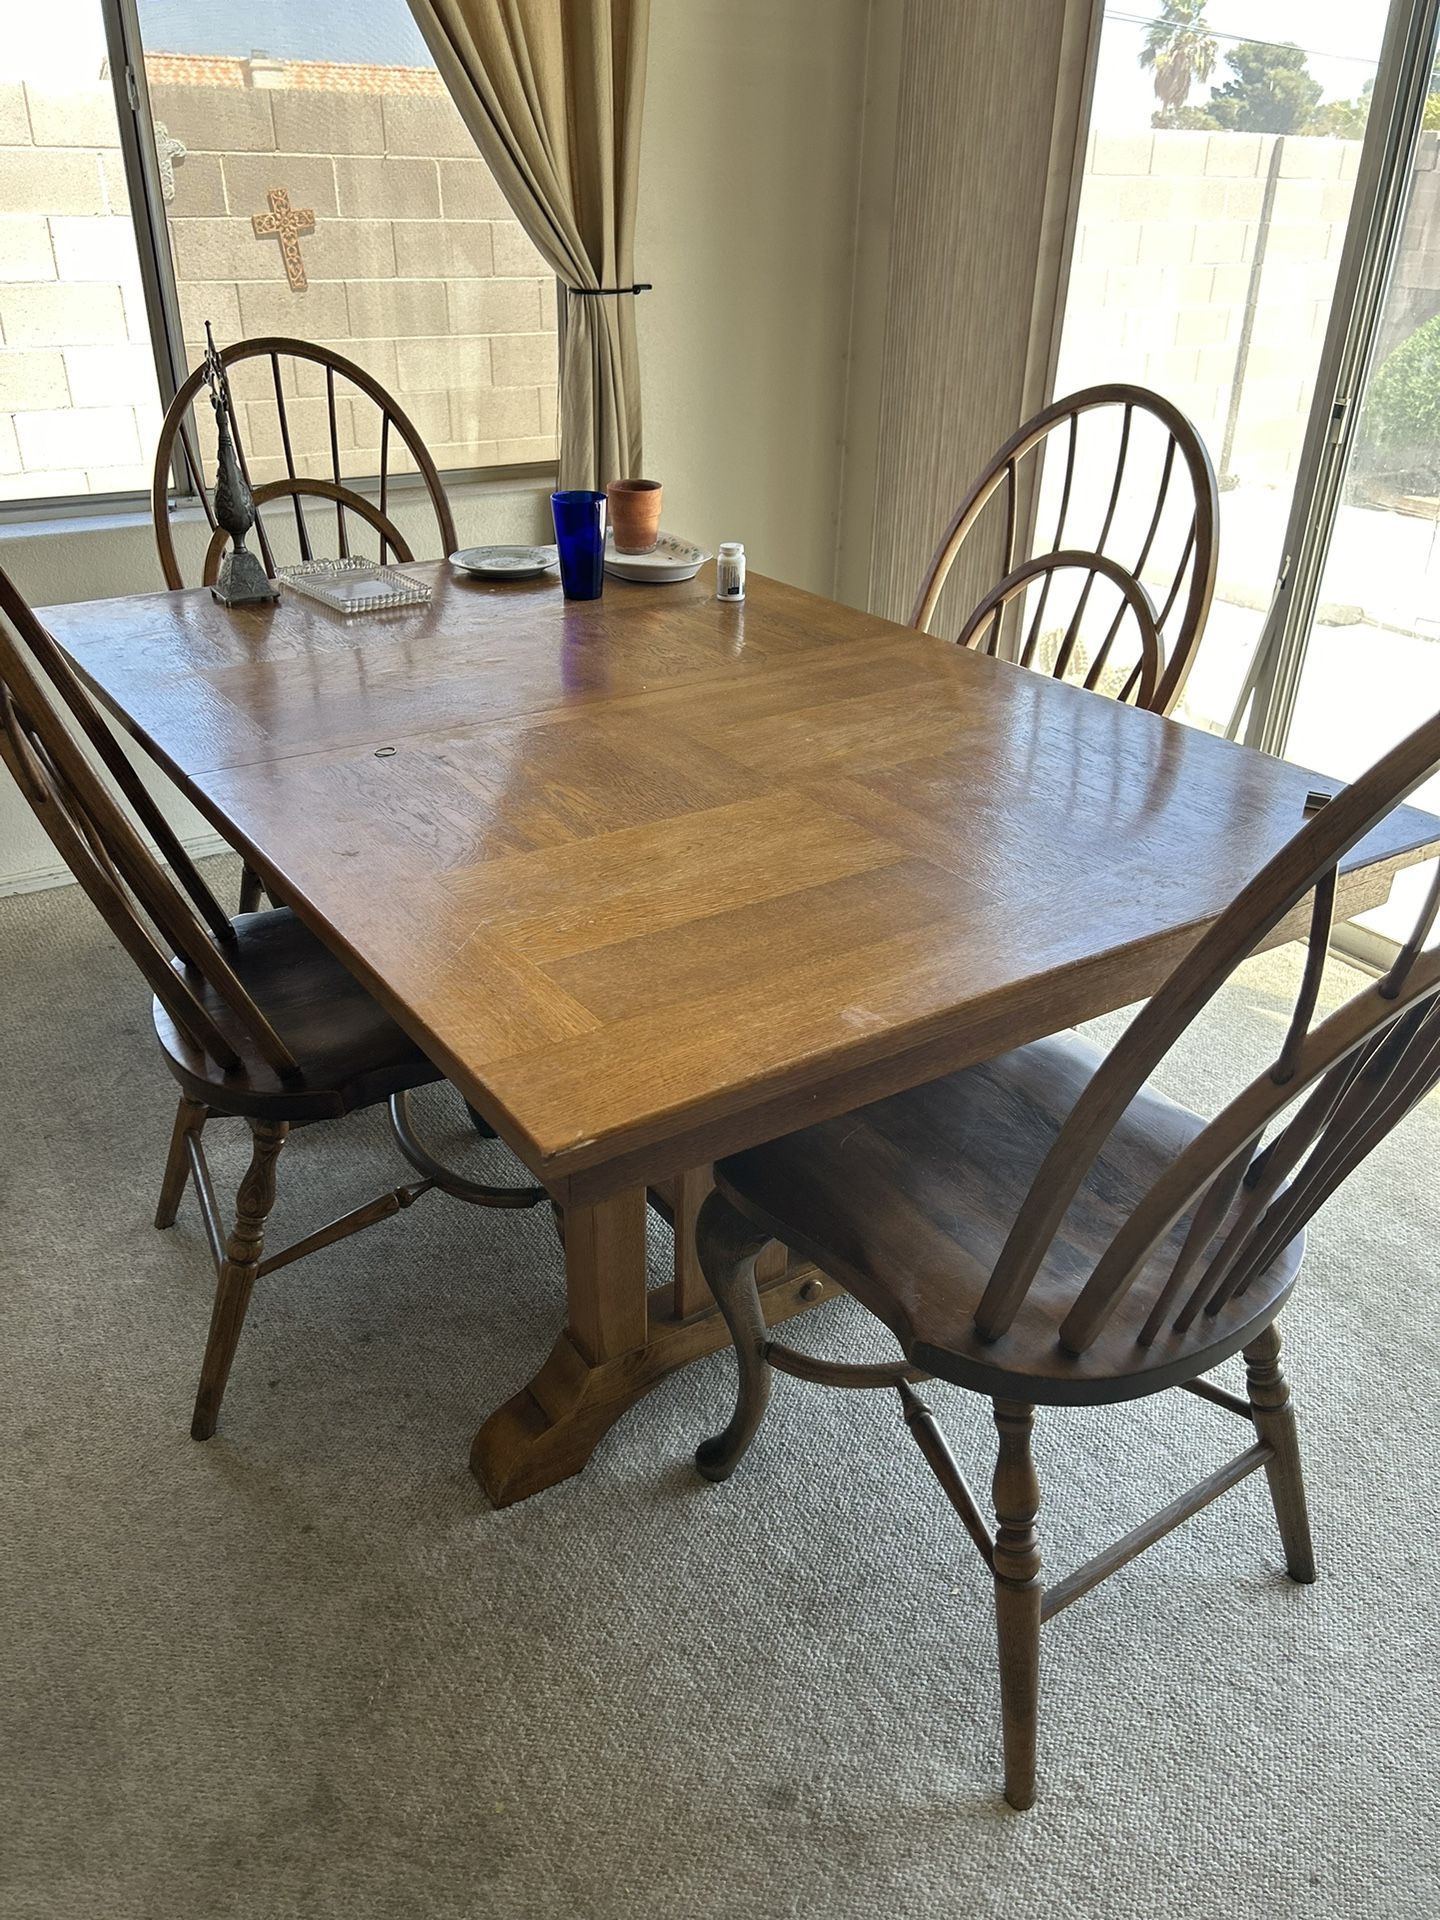 Antique Wooden Kitchen Table And Six Chairs